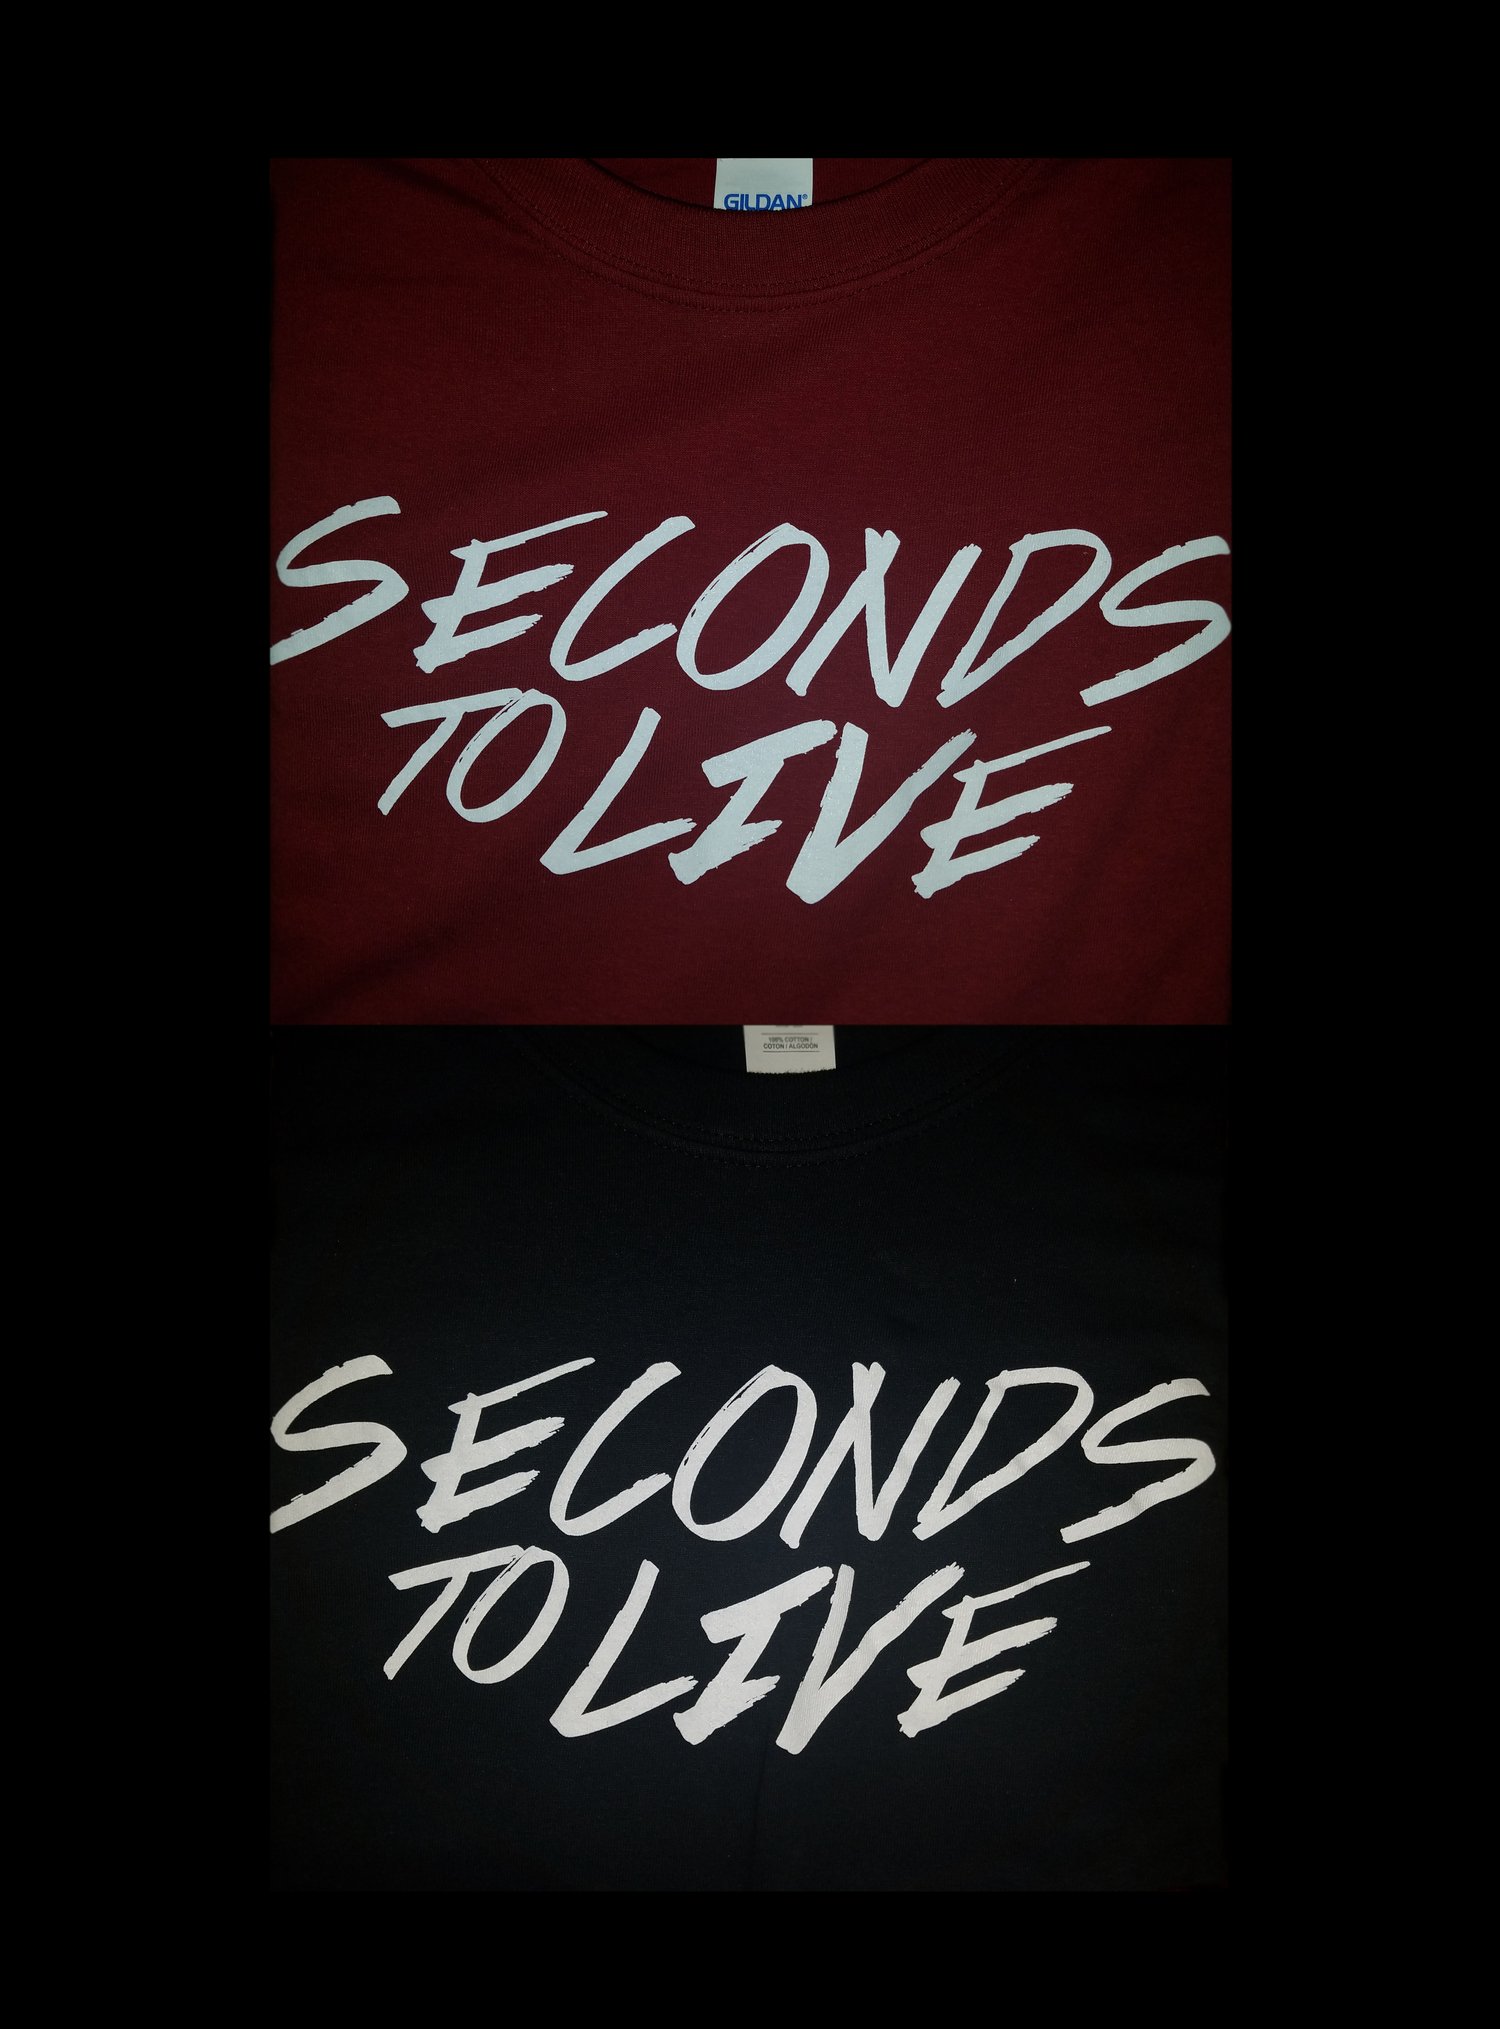 Image of "Seconds to Live" Logo Shirt